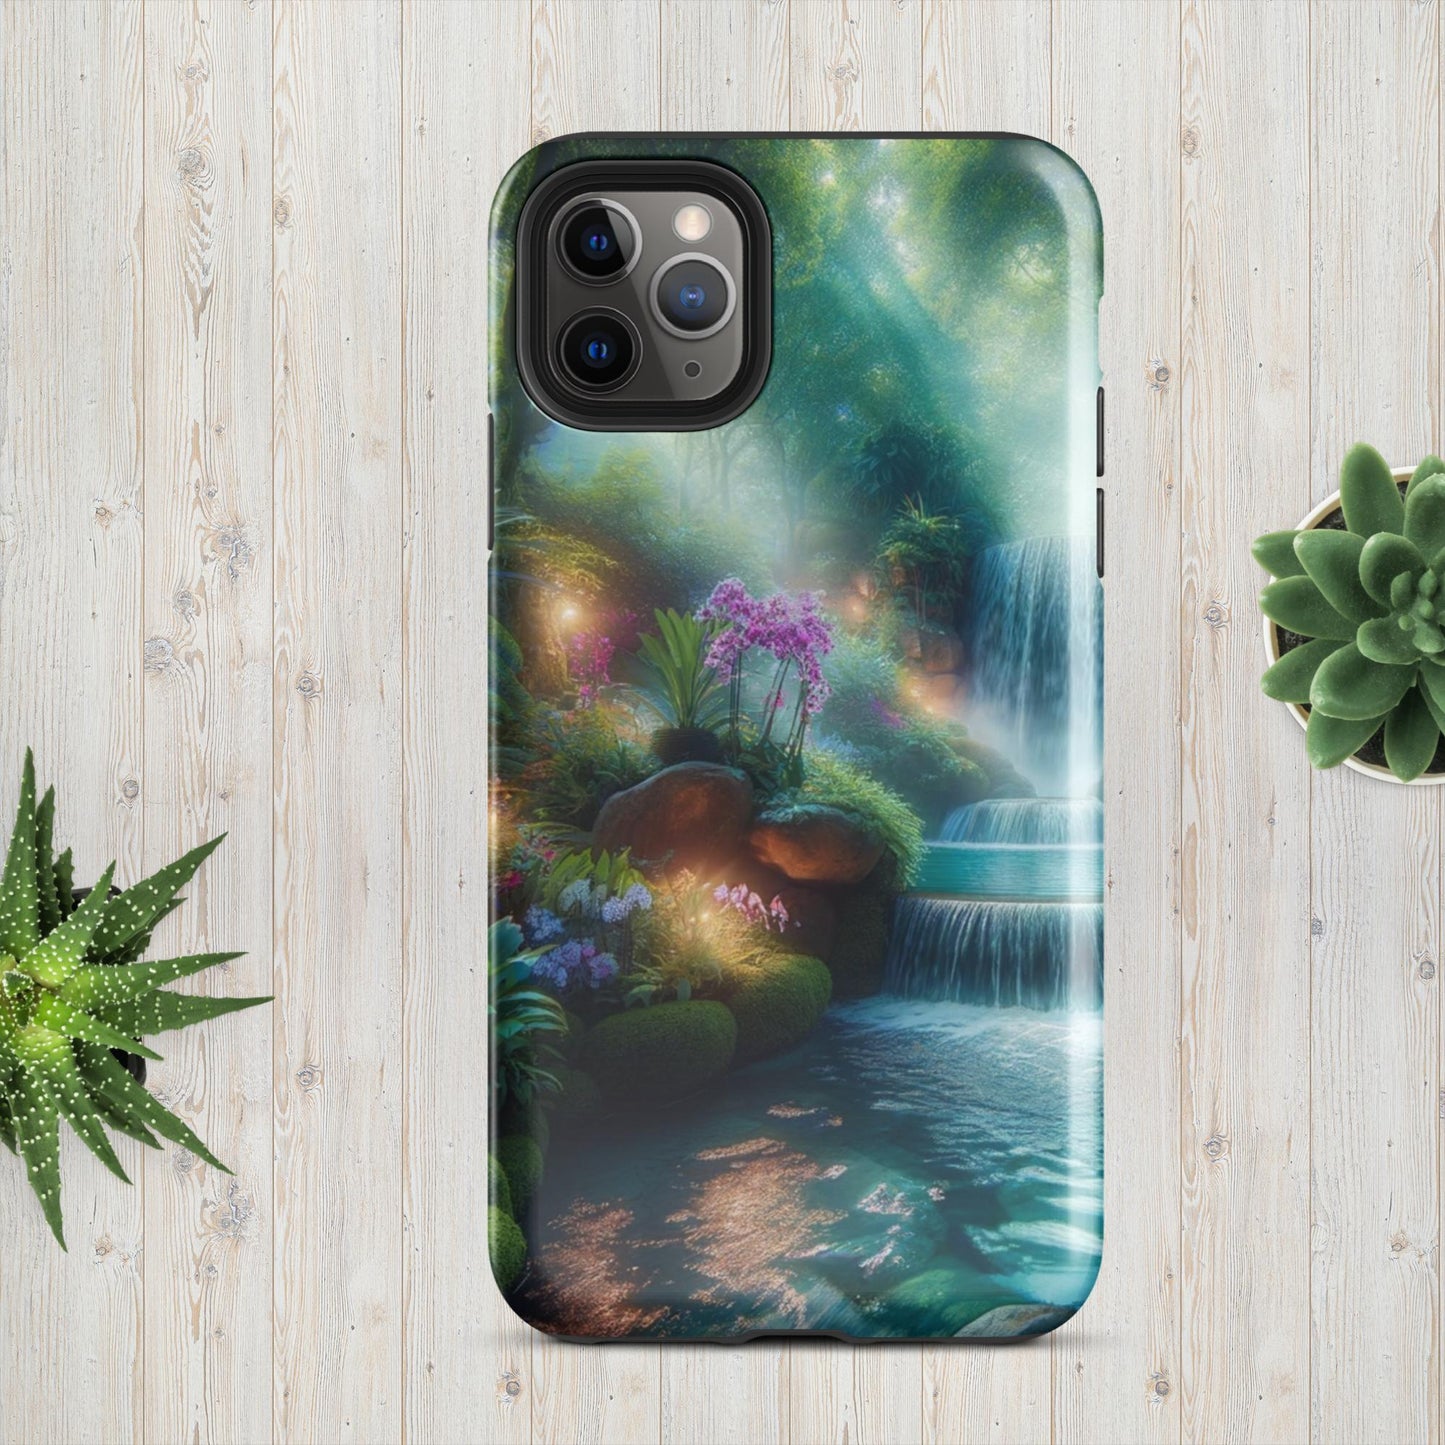 The Hologram Hook Up Glossy / iPhone 11 Pro Max Hidden Secret Tough Case for iPhone®